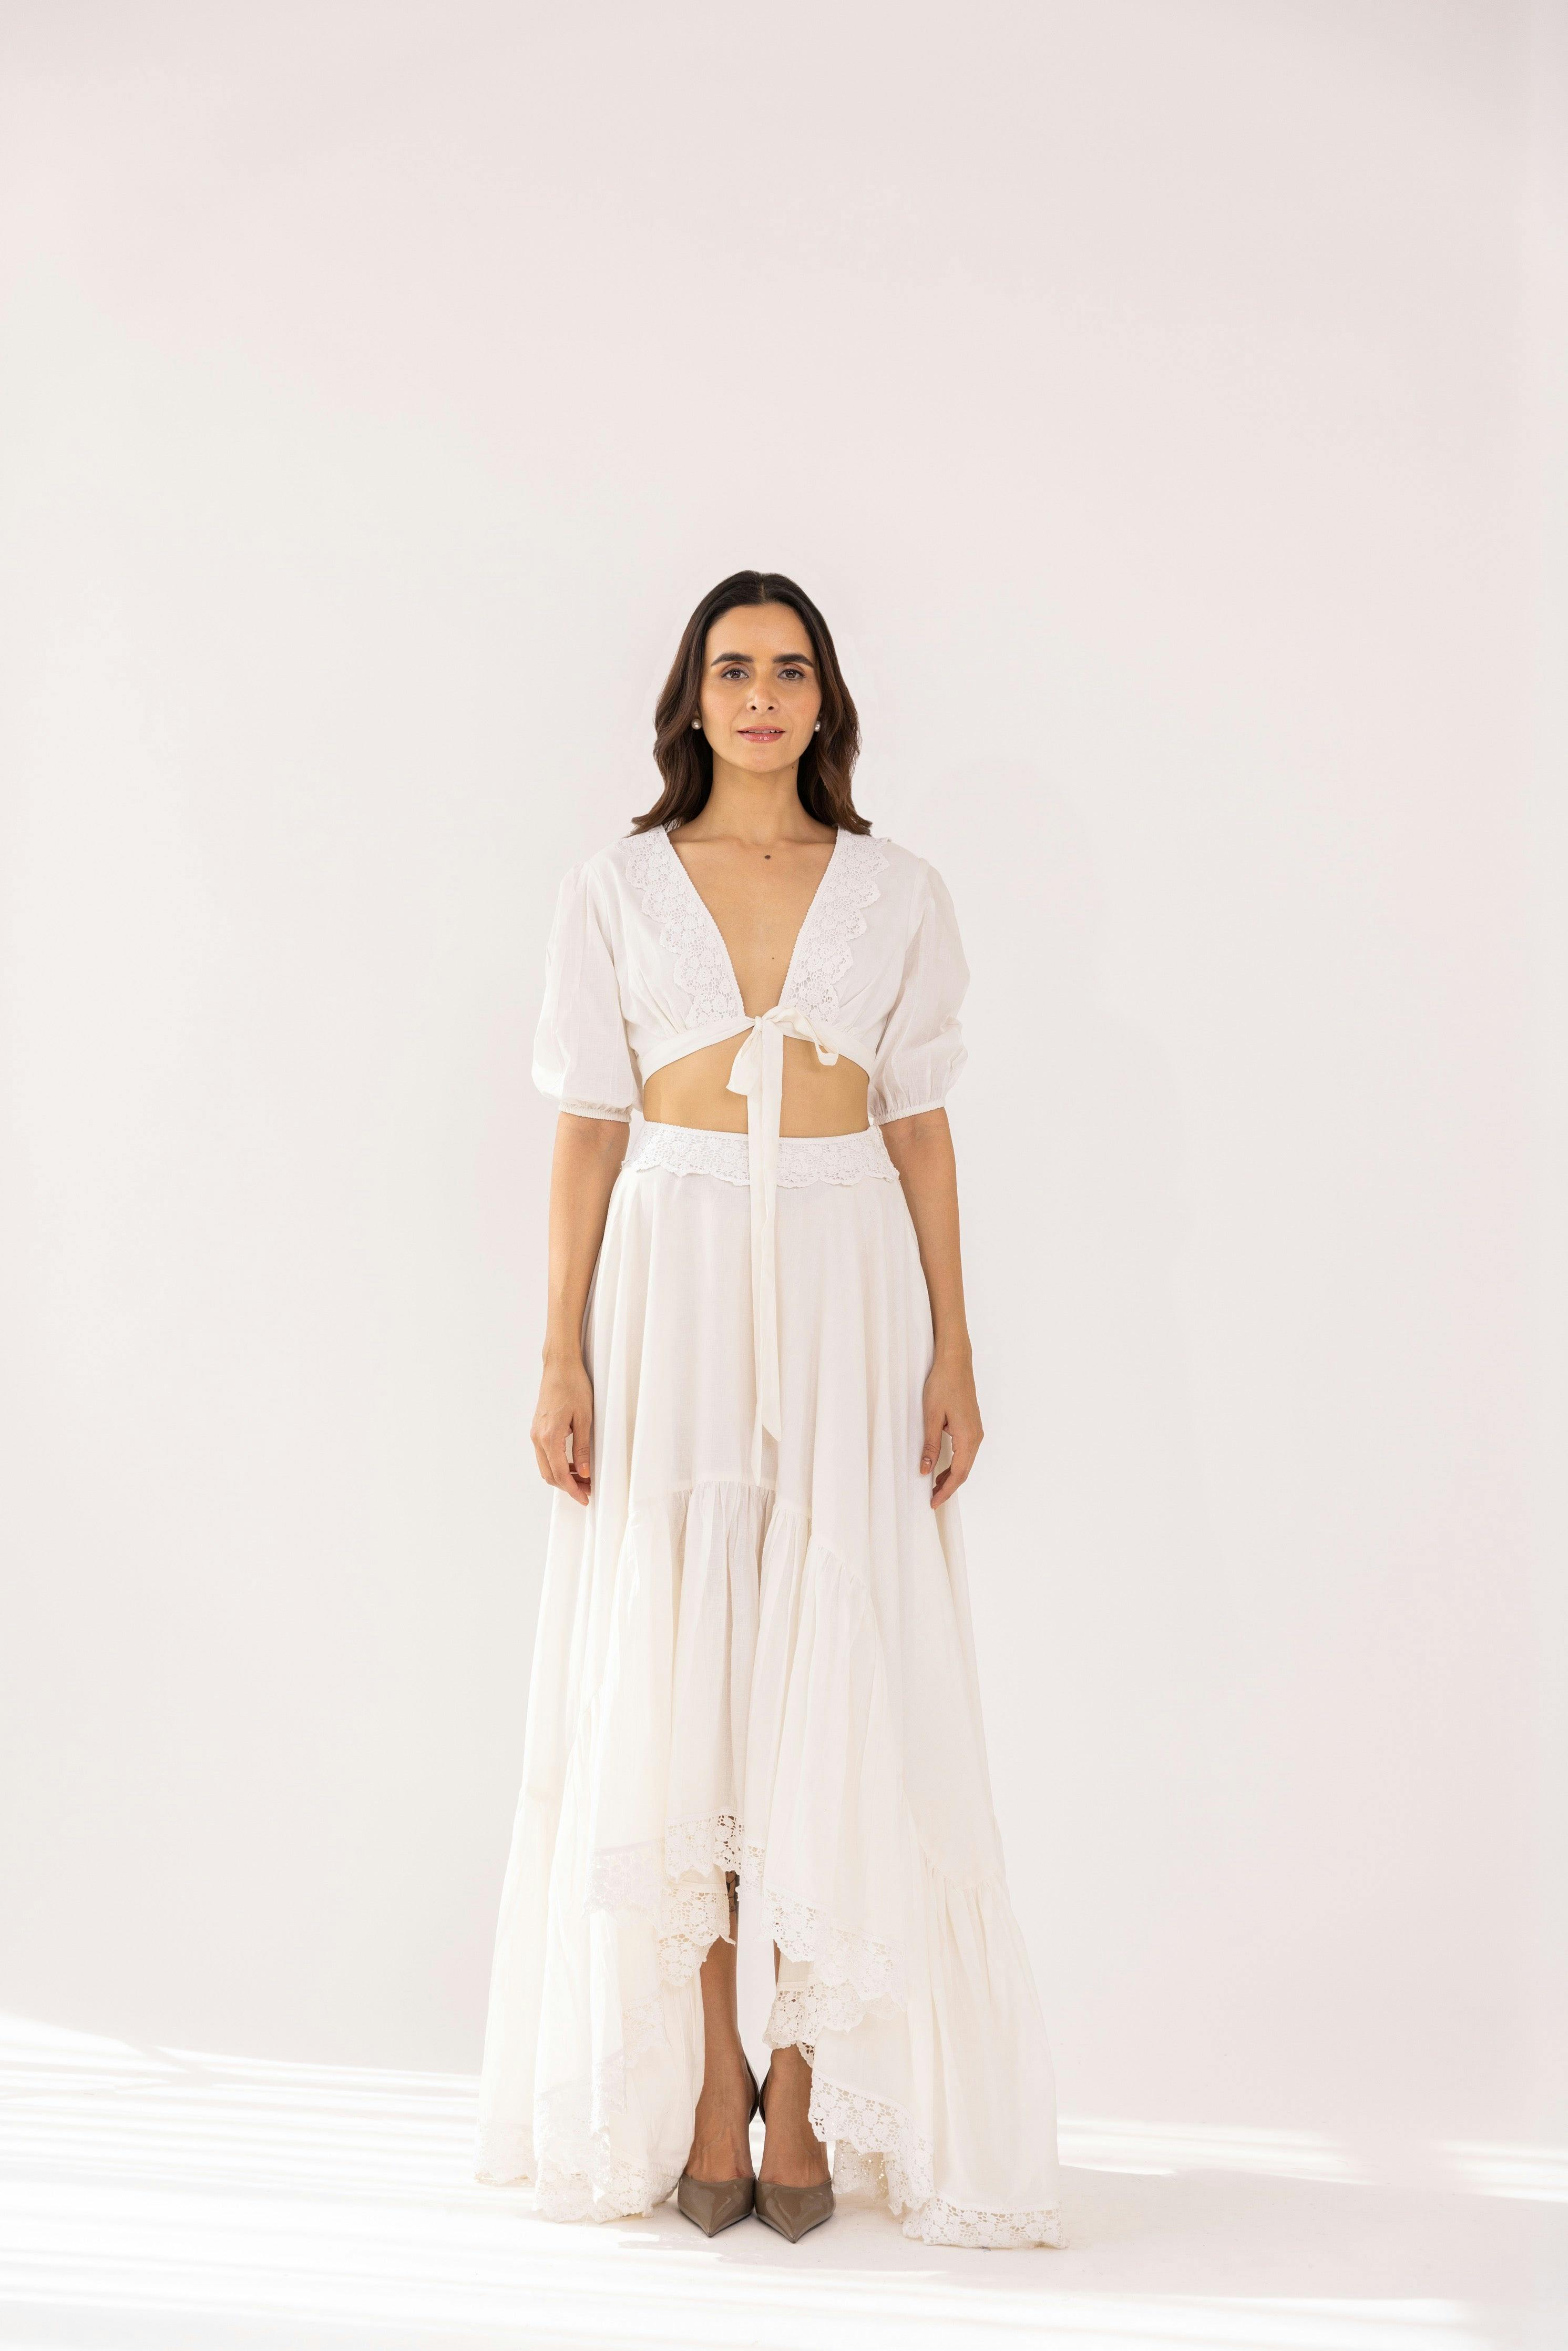 Kaeya Crop Top With Assymetrical Skirt, a product by Shaakha